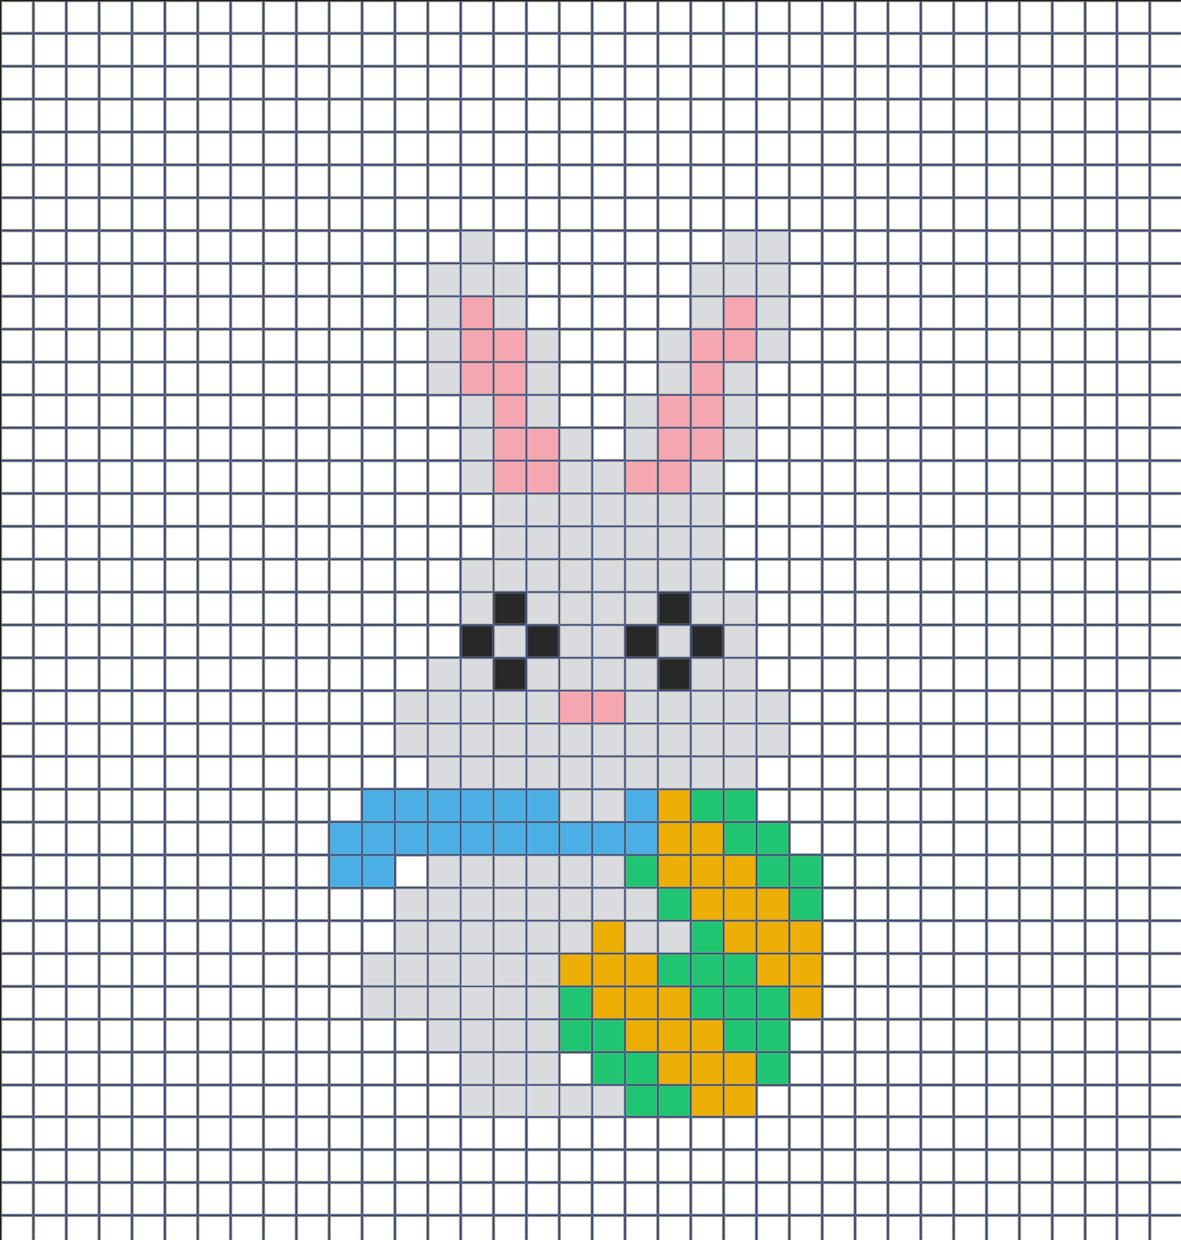 Hama beads template for kids. White Easter bunny. 